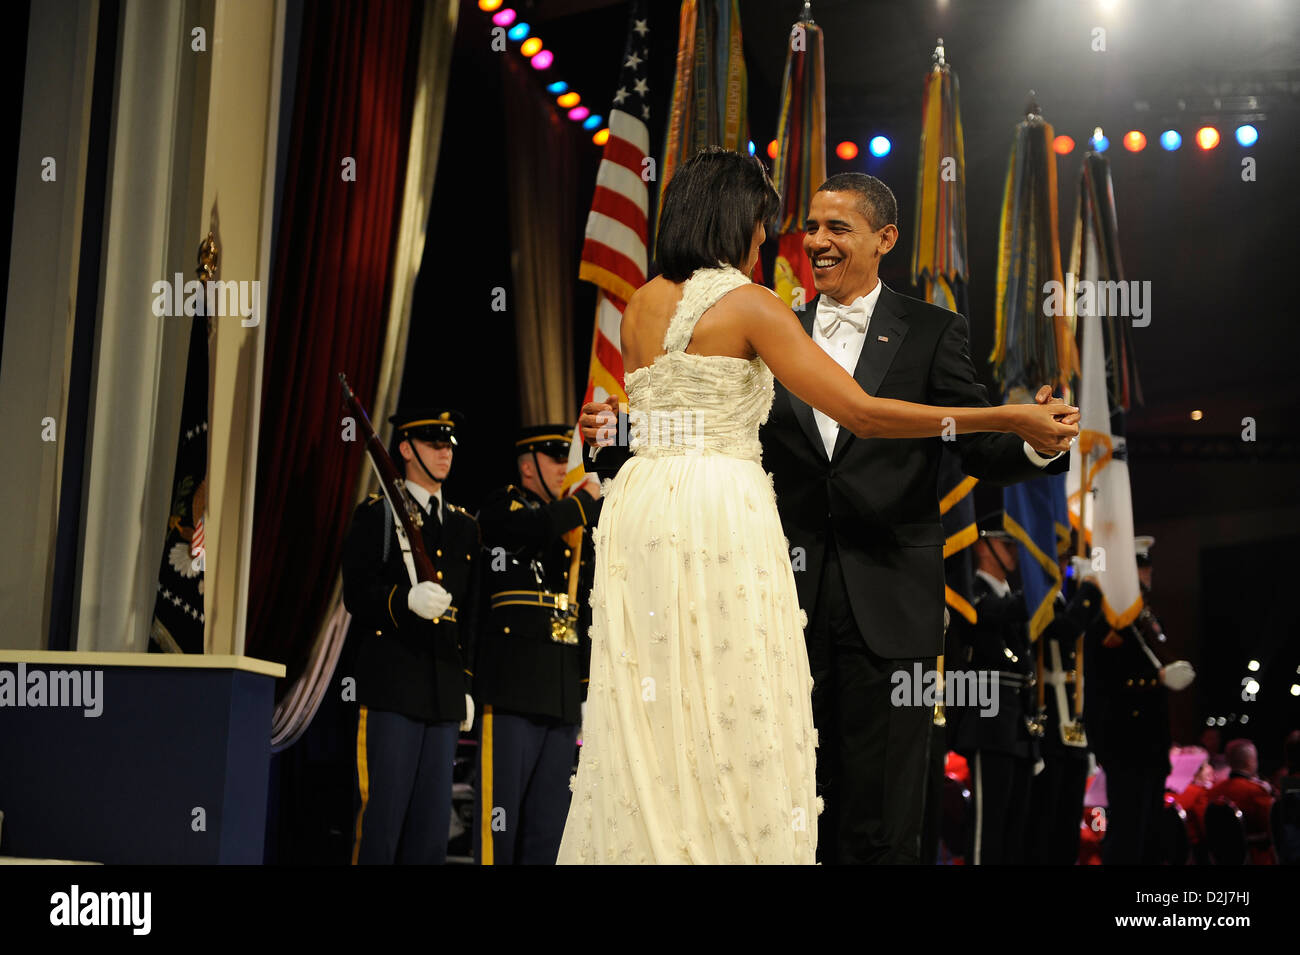 President Barack Obama and First Lady Michelle Obama dance at the Mid-Atlantic Ball in Washington, DC January 20, 2009. Stock Photo